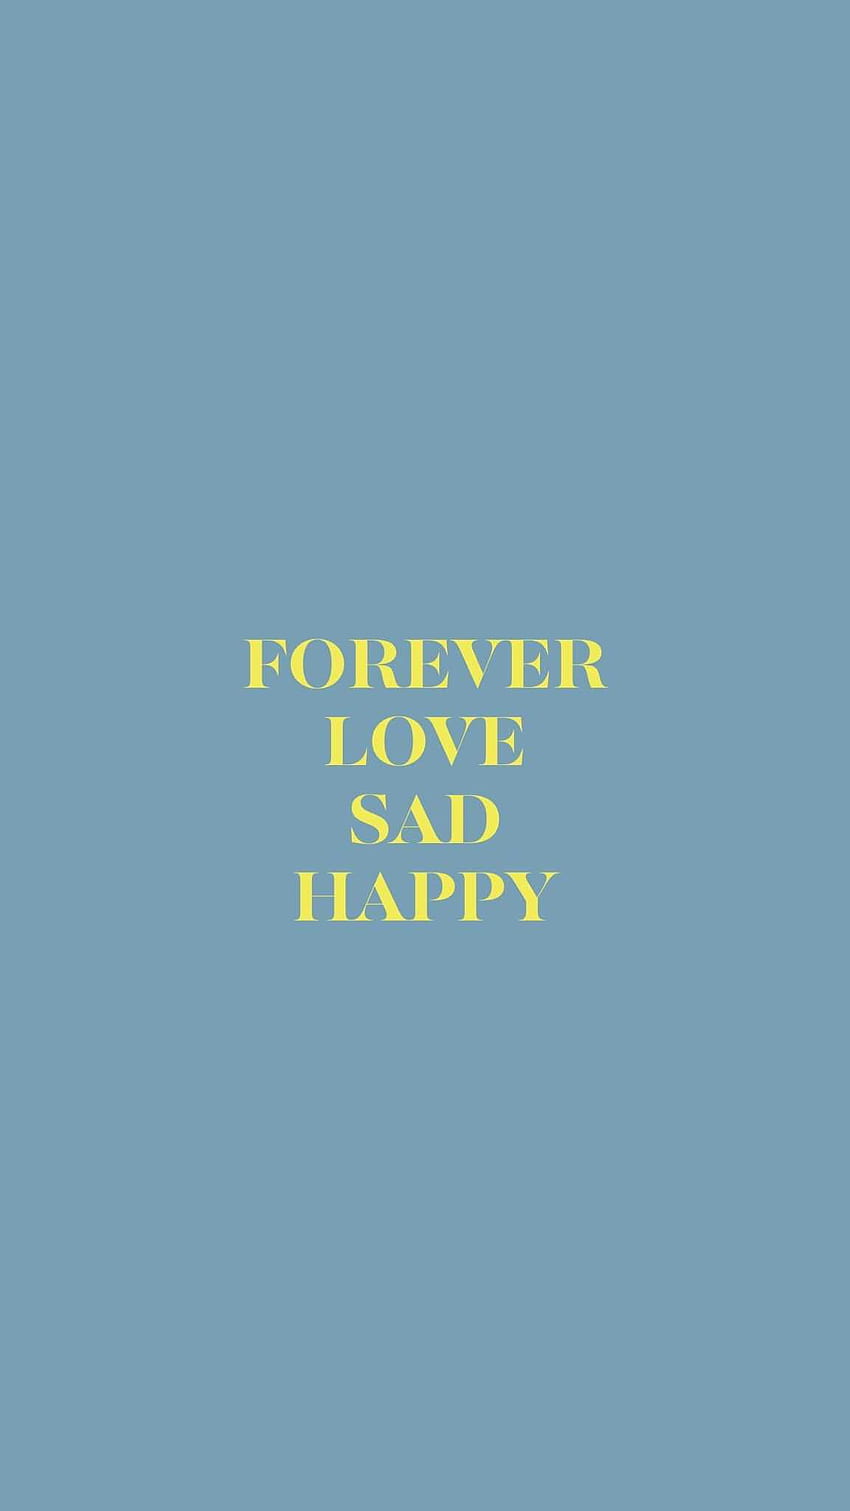 Forever Love Sad Hapy - Awesome HD phone wallpaper